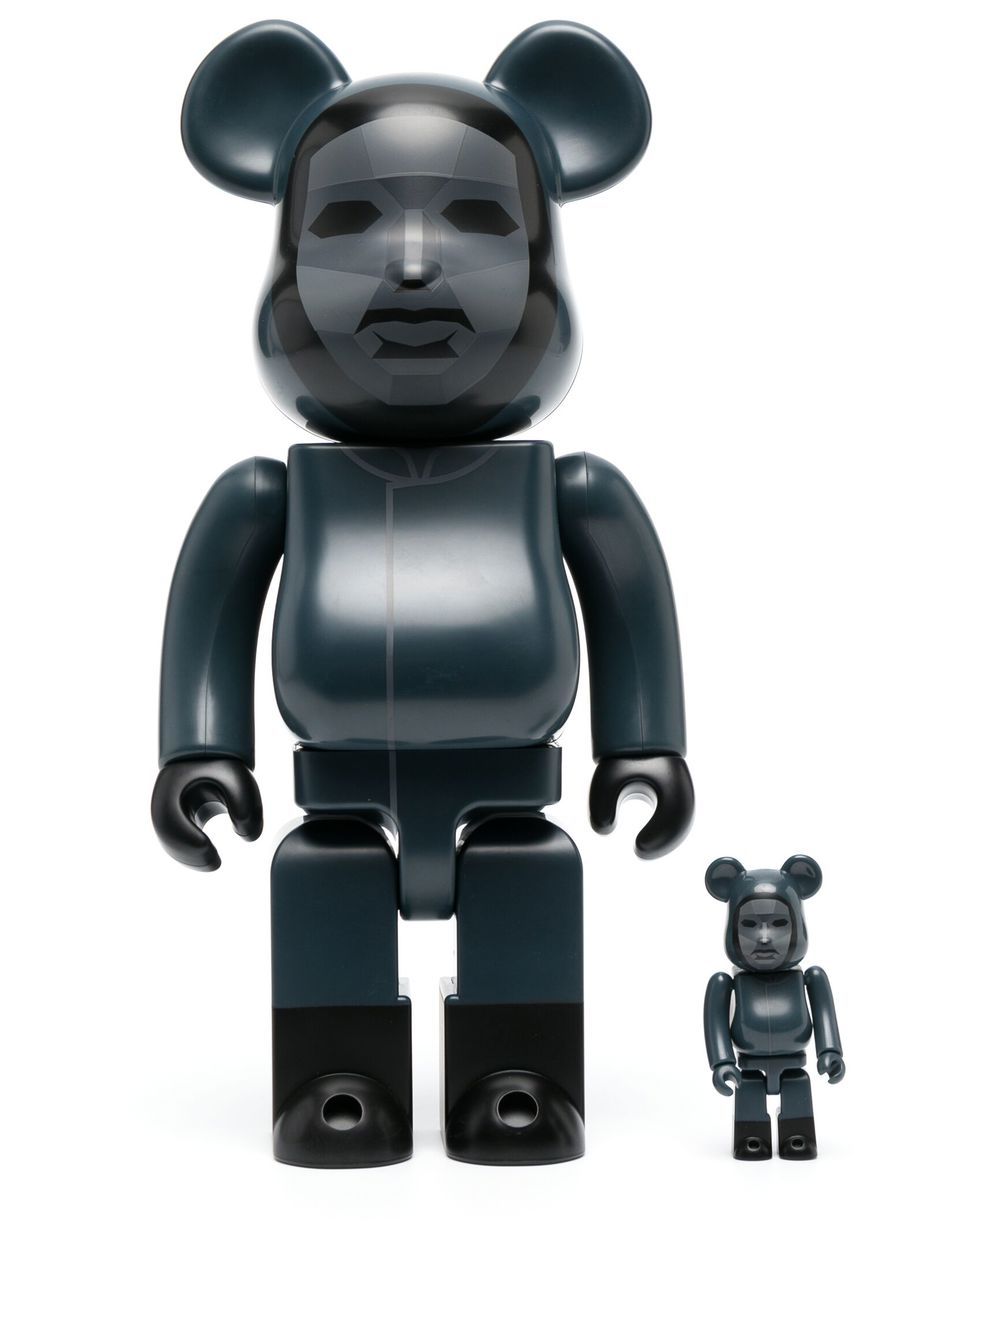 Medicom Toy Squid Game Be@rbrick 100% And 400% Figure Set In Black